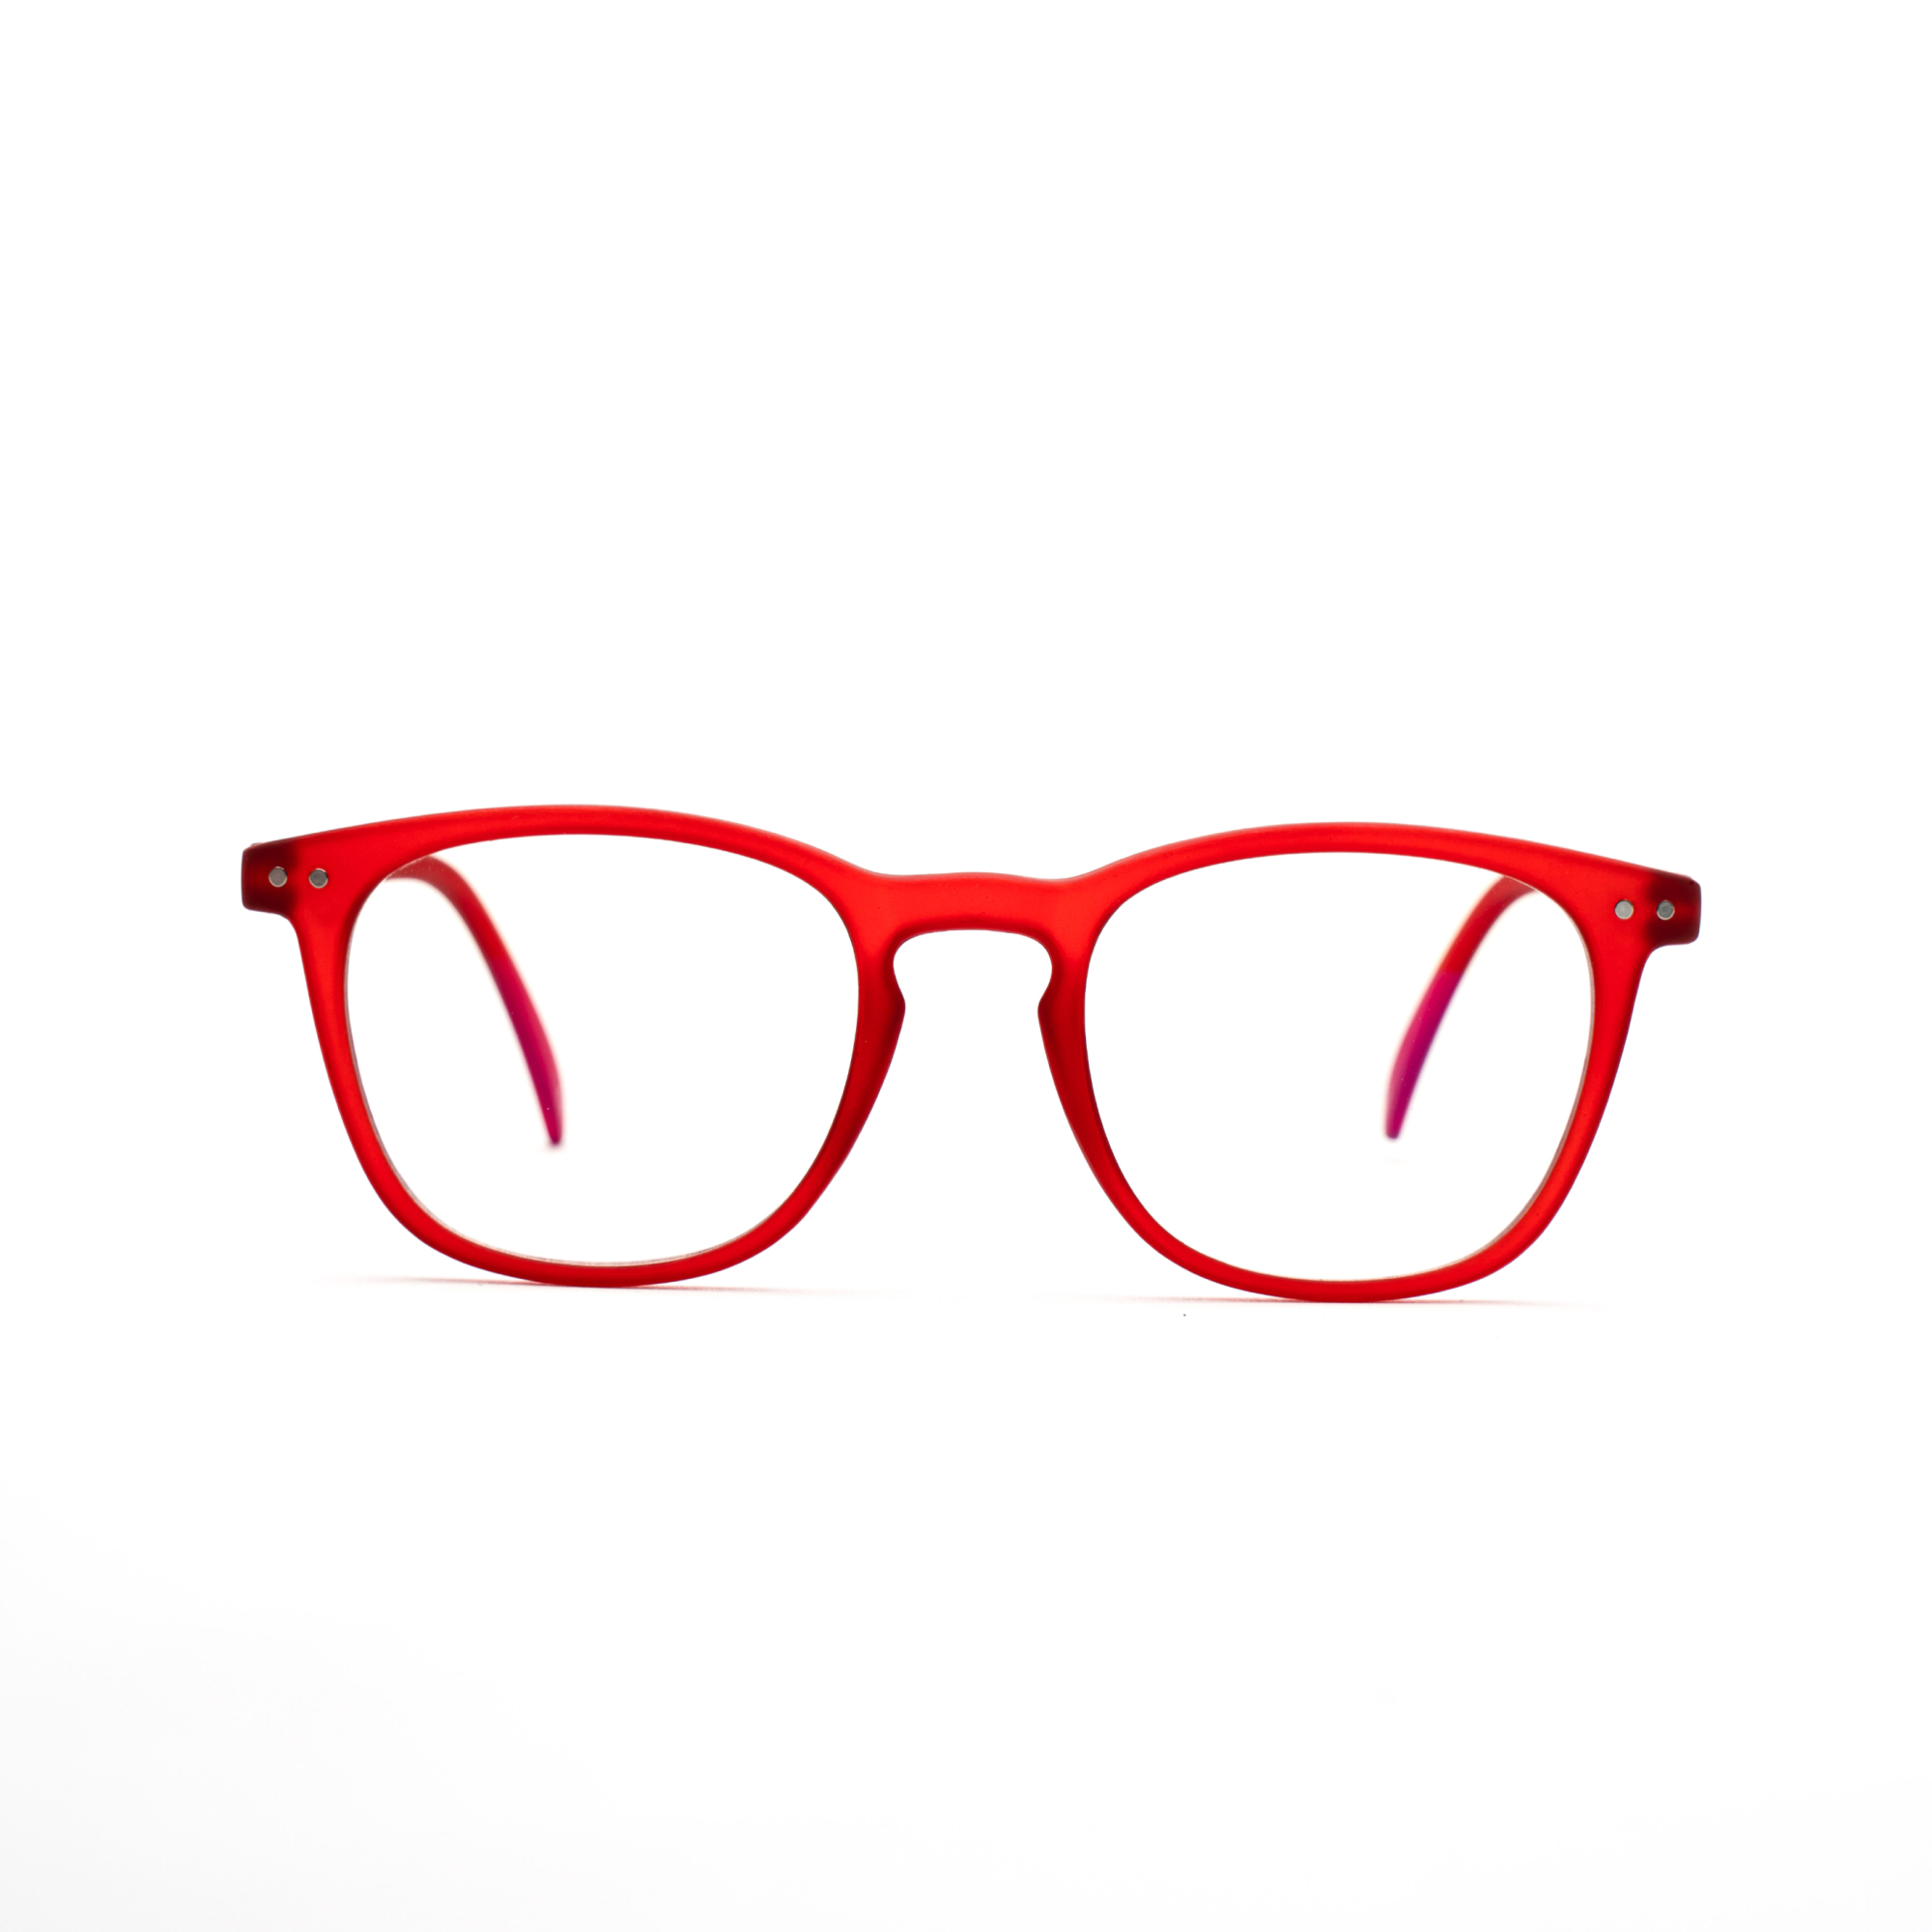 Women's blue light reading glasses – William BlueVision w - Red